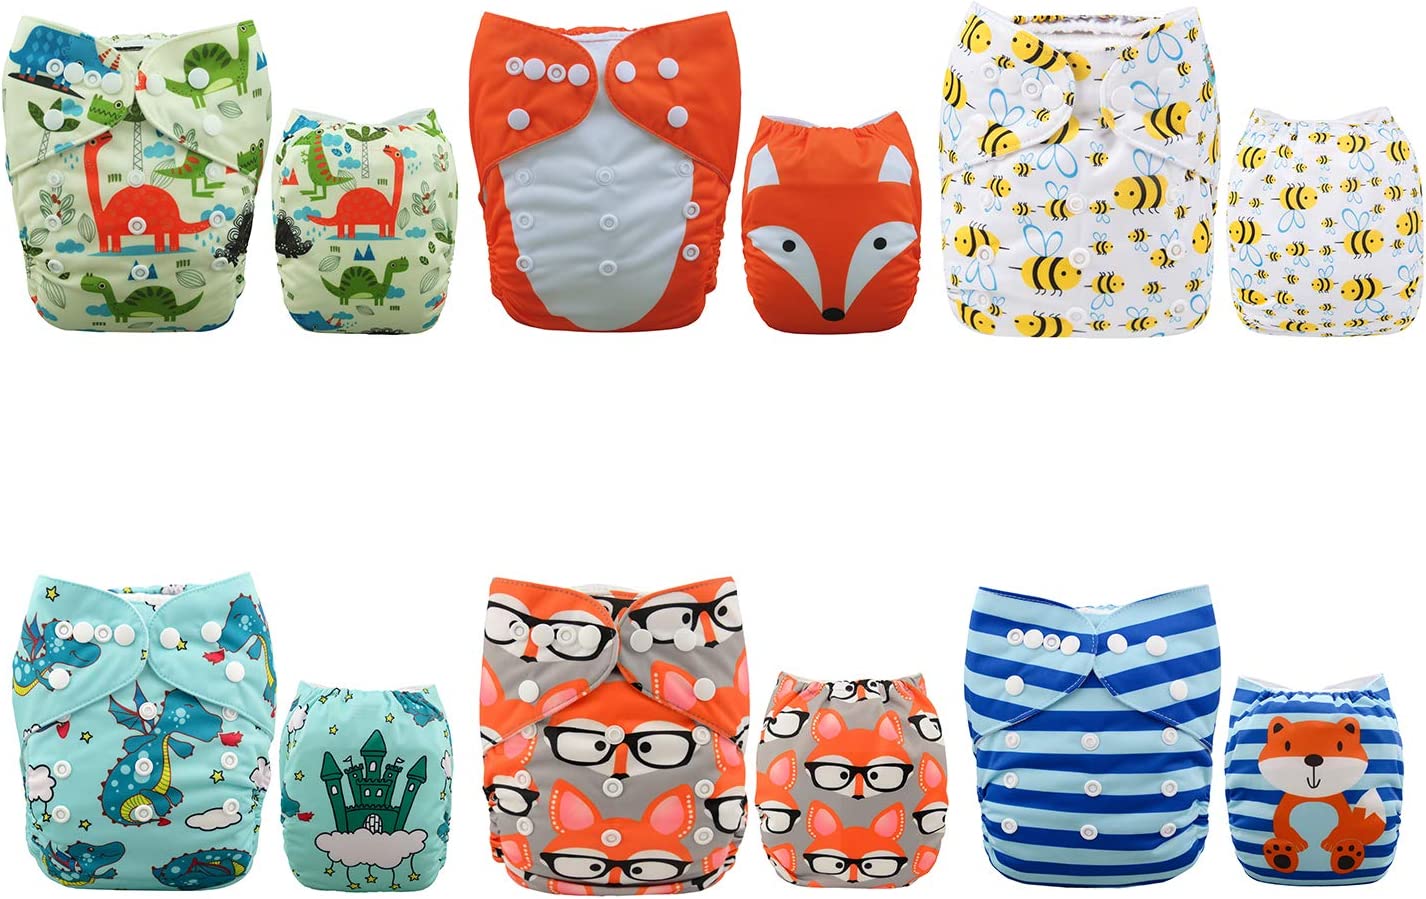 ALVABABY Mother’s Day Baby Cloth Diapers One Size Adjustable Washable Reusable for Baby Girls and Boys 6 Pack + 12 Inserts 6DM48